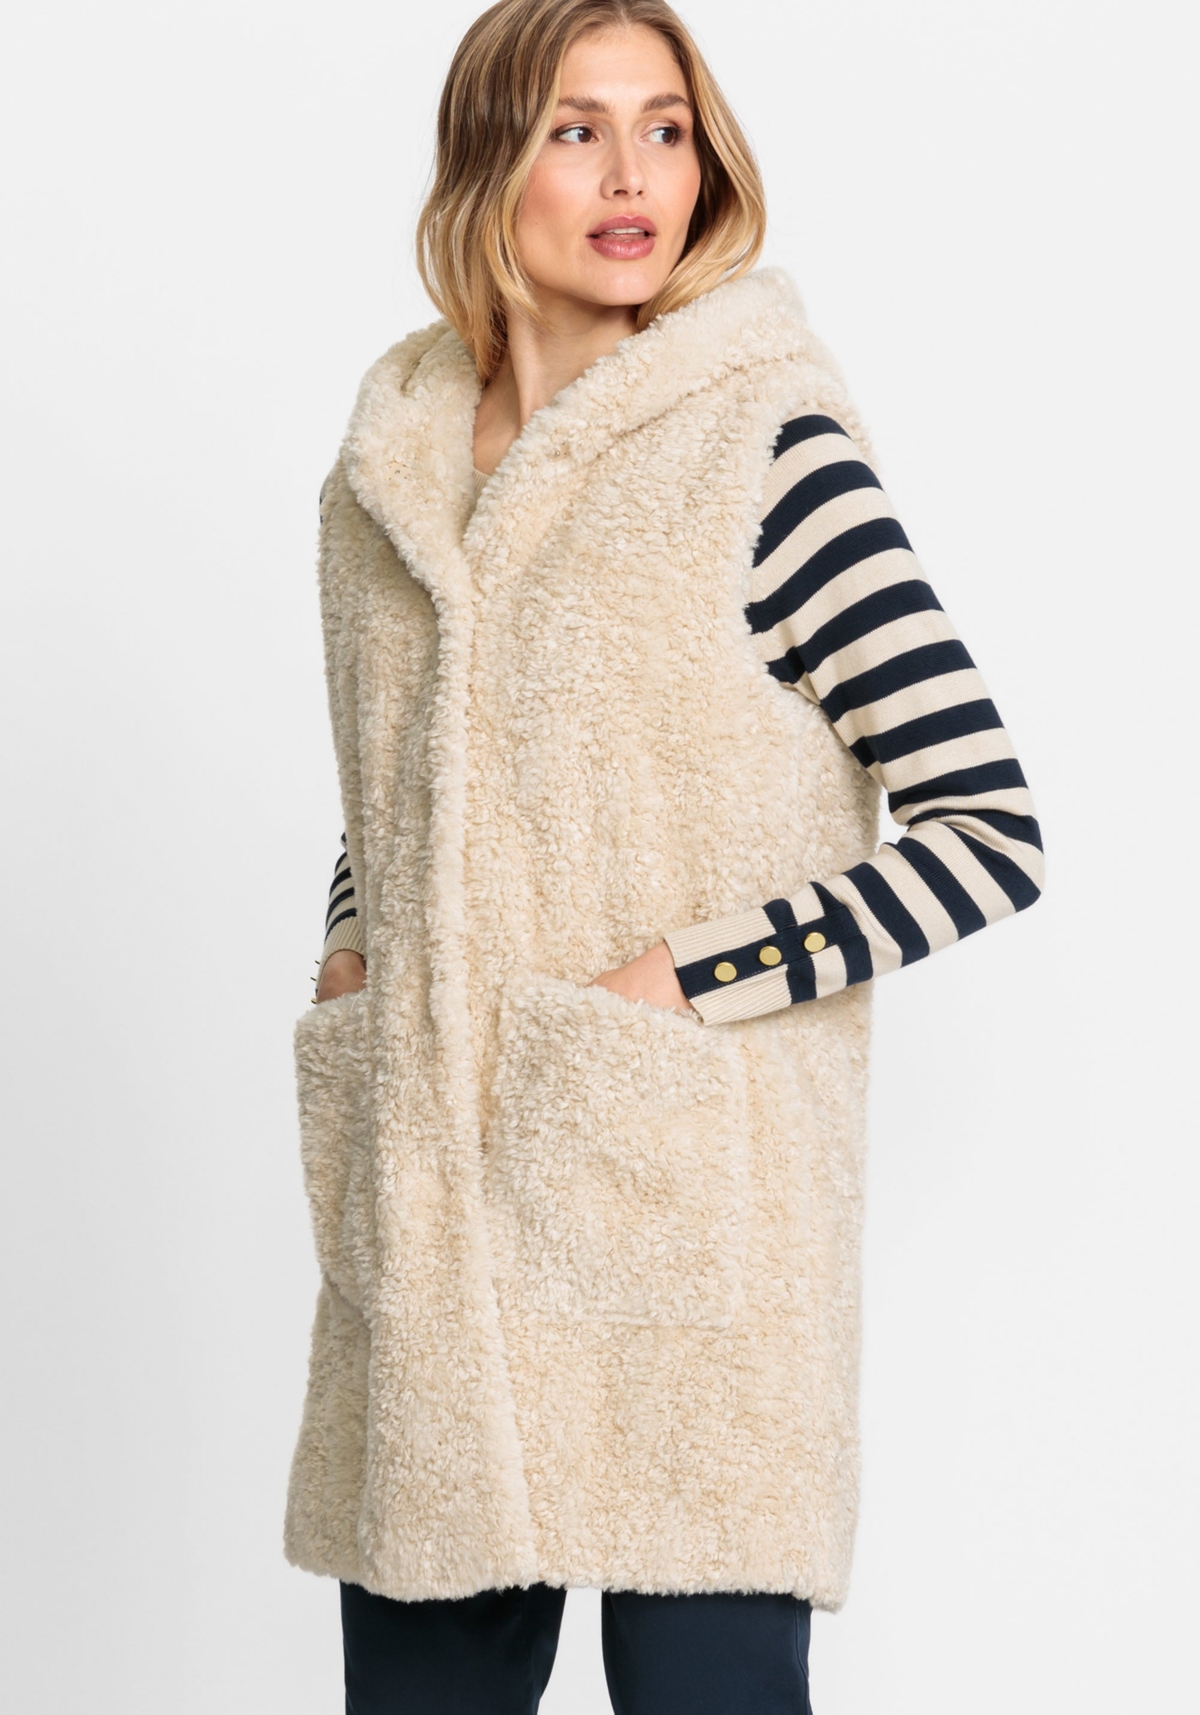 Long Line Teddy Vest with Hood - White